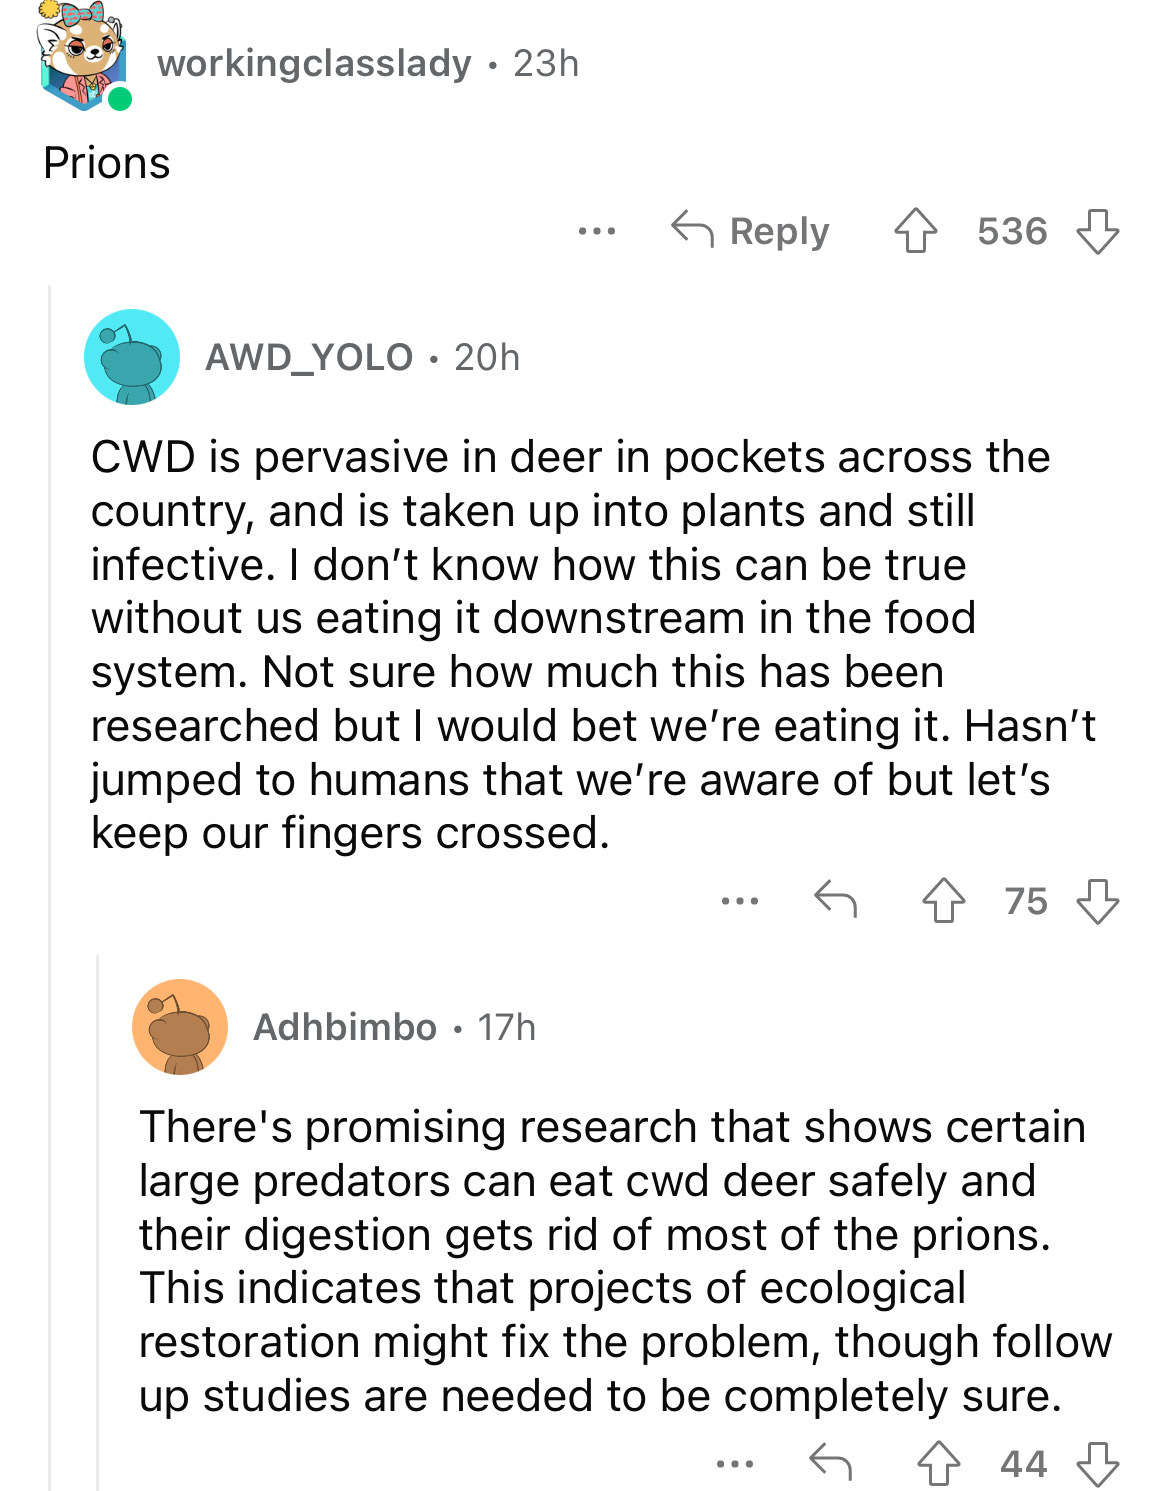 screenshot - Prions workingclasslady 23h 536 AWD_YOLO. 20h Cwd is pervasive in deer in pockets across the country, and is taken up into plants and still infective. I don't know how this can be true without us eating it downstream in the food system. Not s